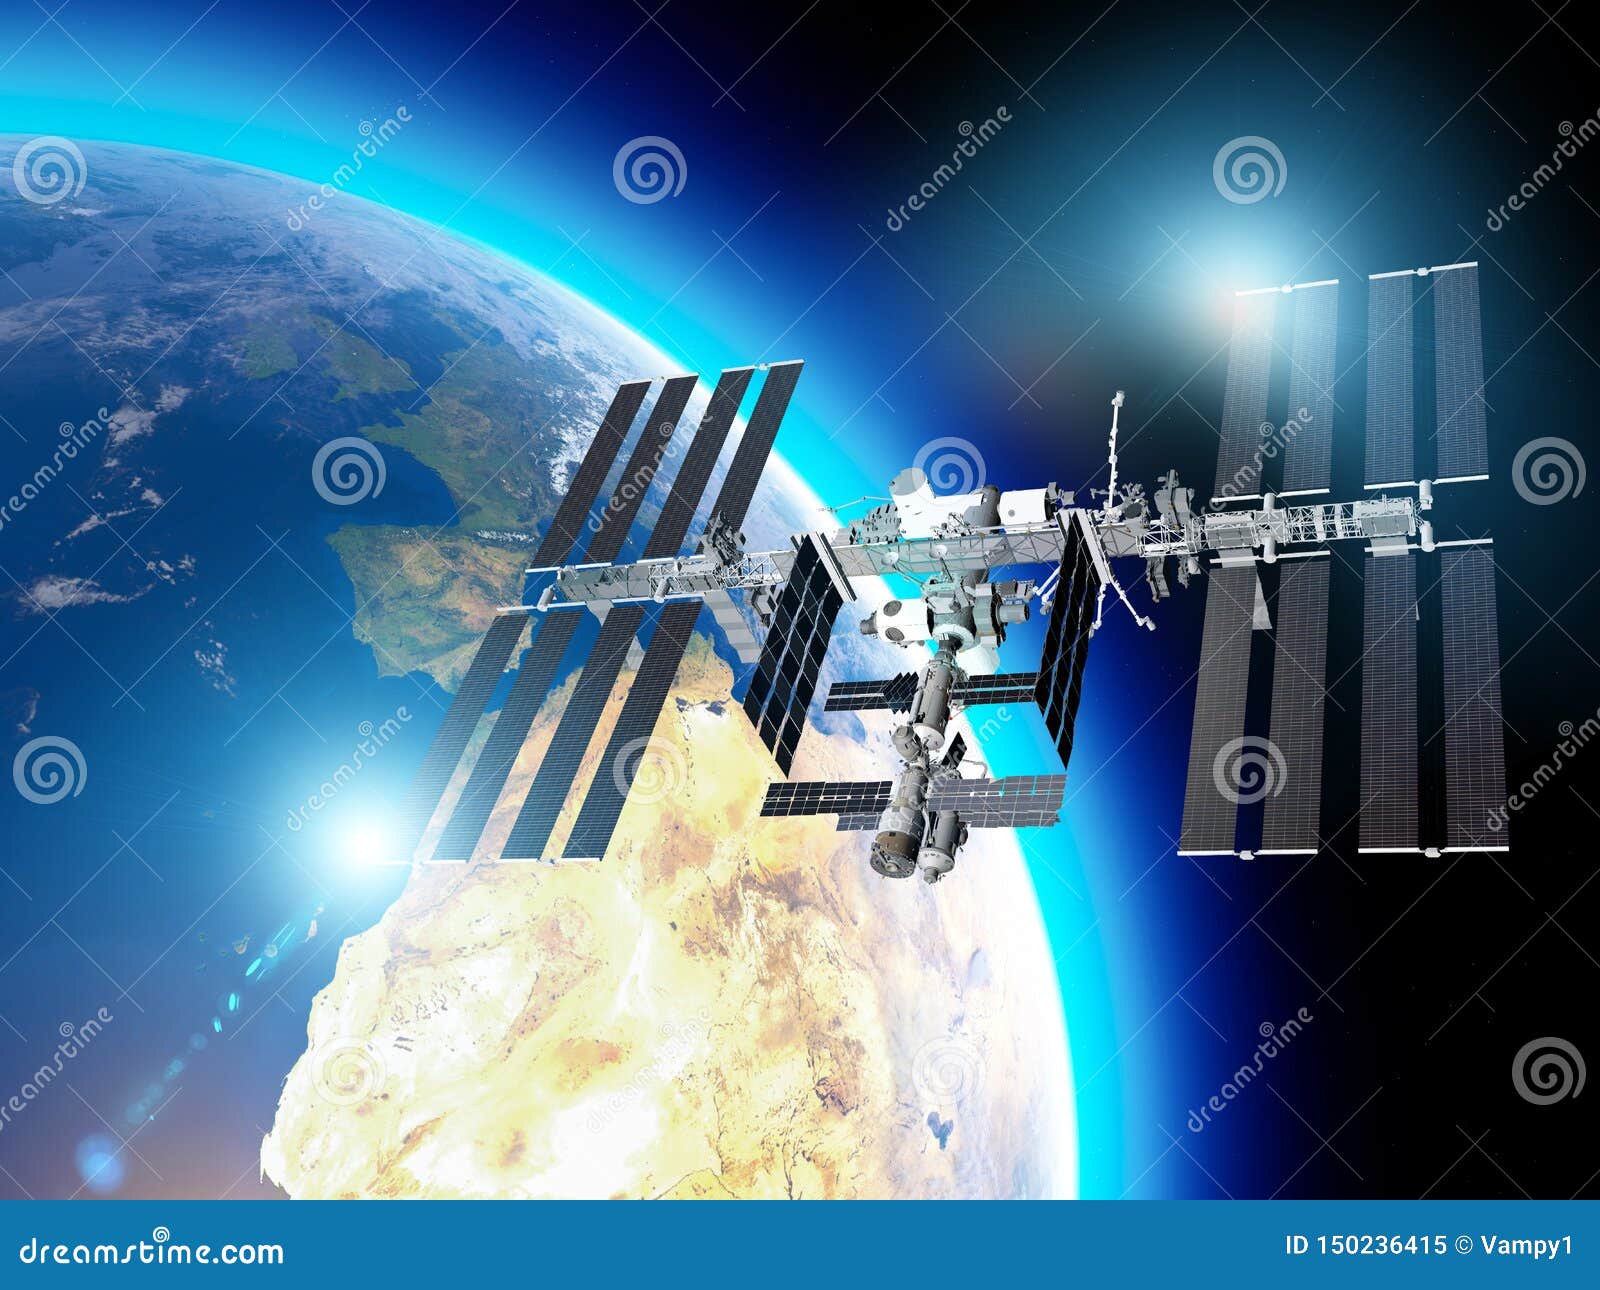 the international space station iss is a space station, or a habitable artificial satellite, in low earth orbit. satellite view